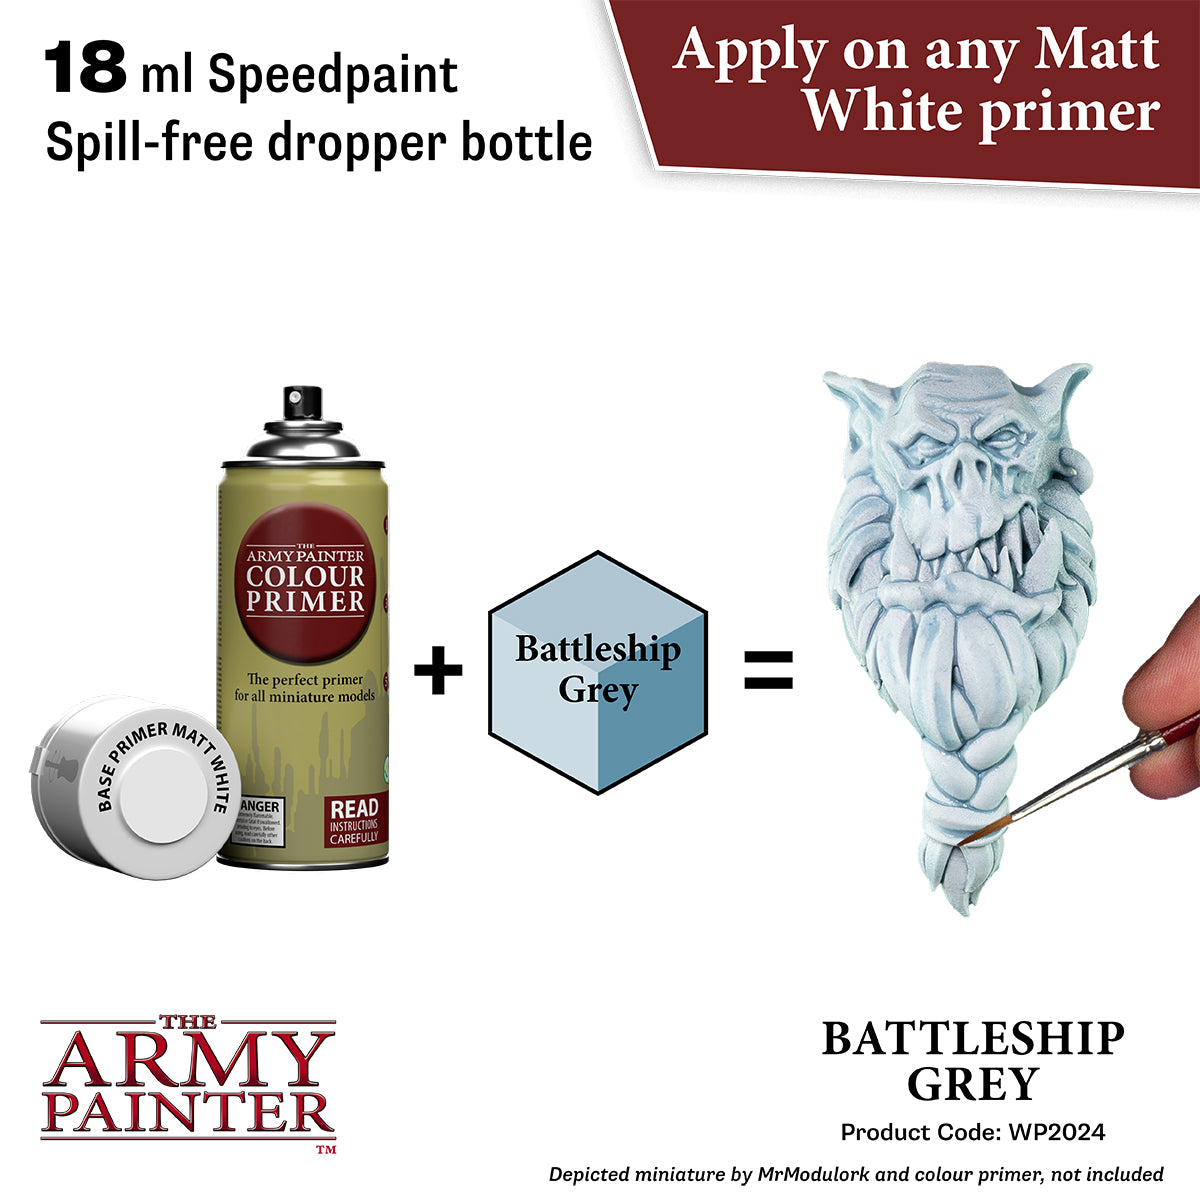 The Army Painter just announced Speedpaint 2.0 with apparently no